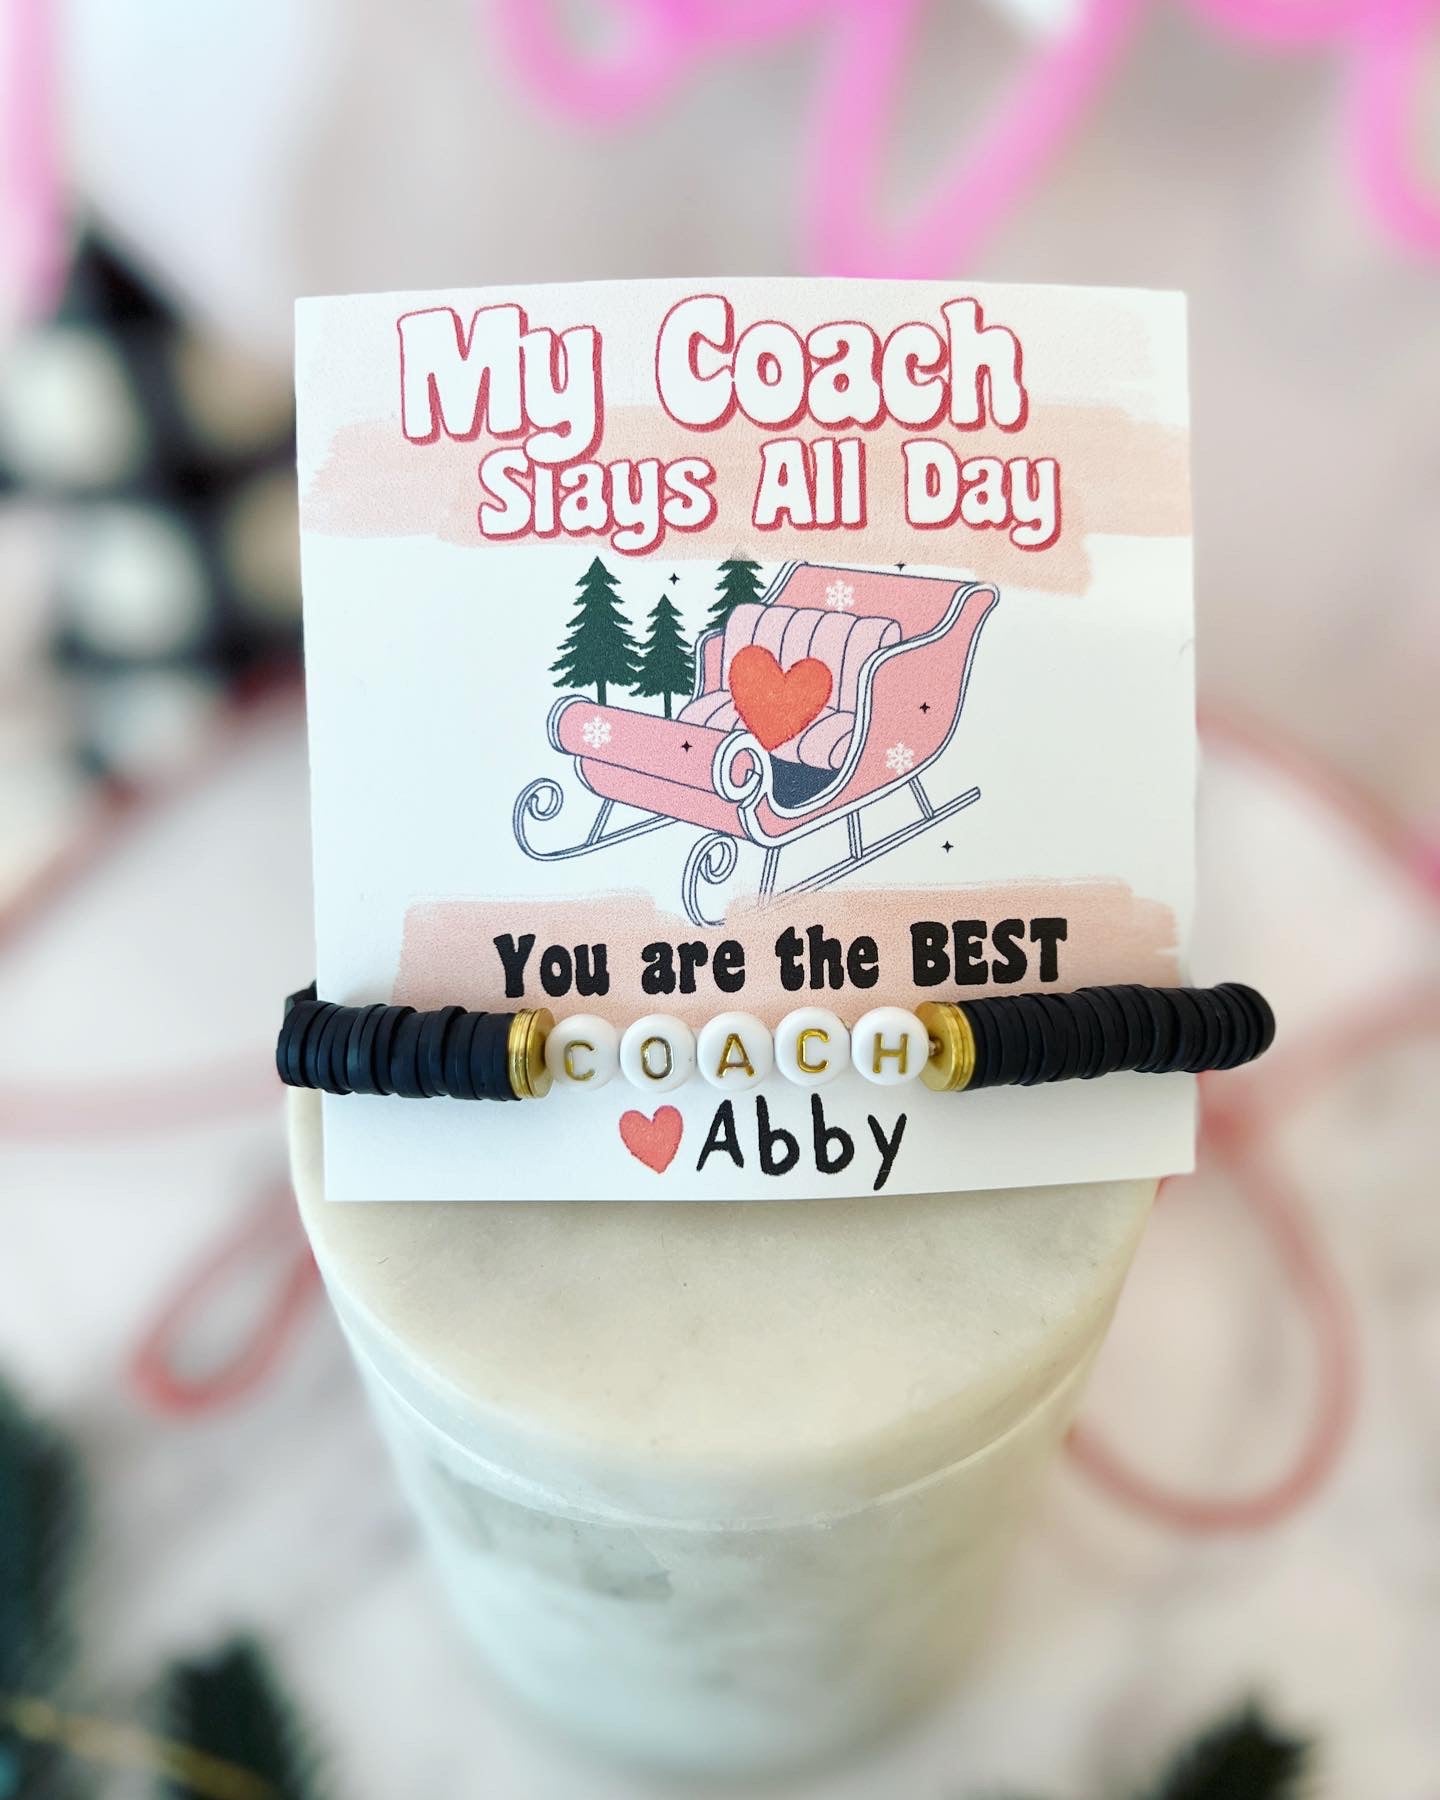 My Coach Slays all day,Coach gift! Holiday Christmas Coach appreciation gift,clay disc bead COACH bracelet, personalized card, box & ribbon!